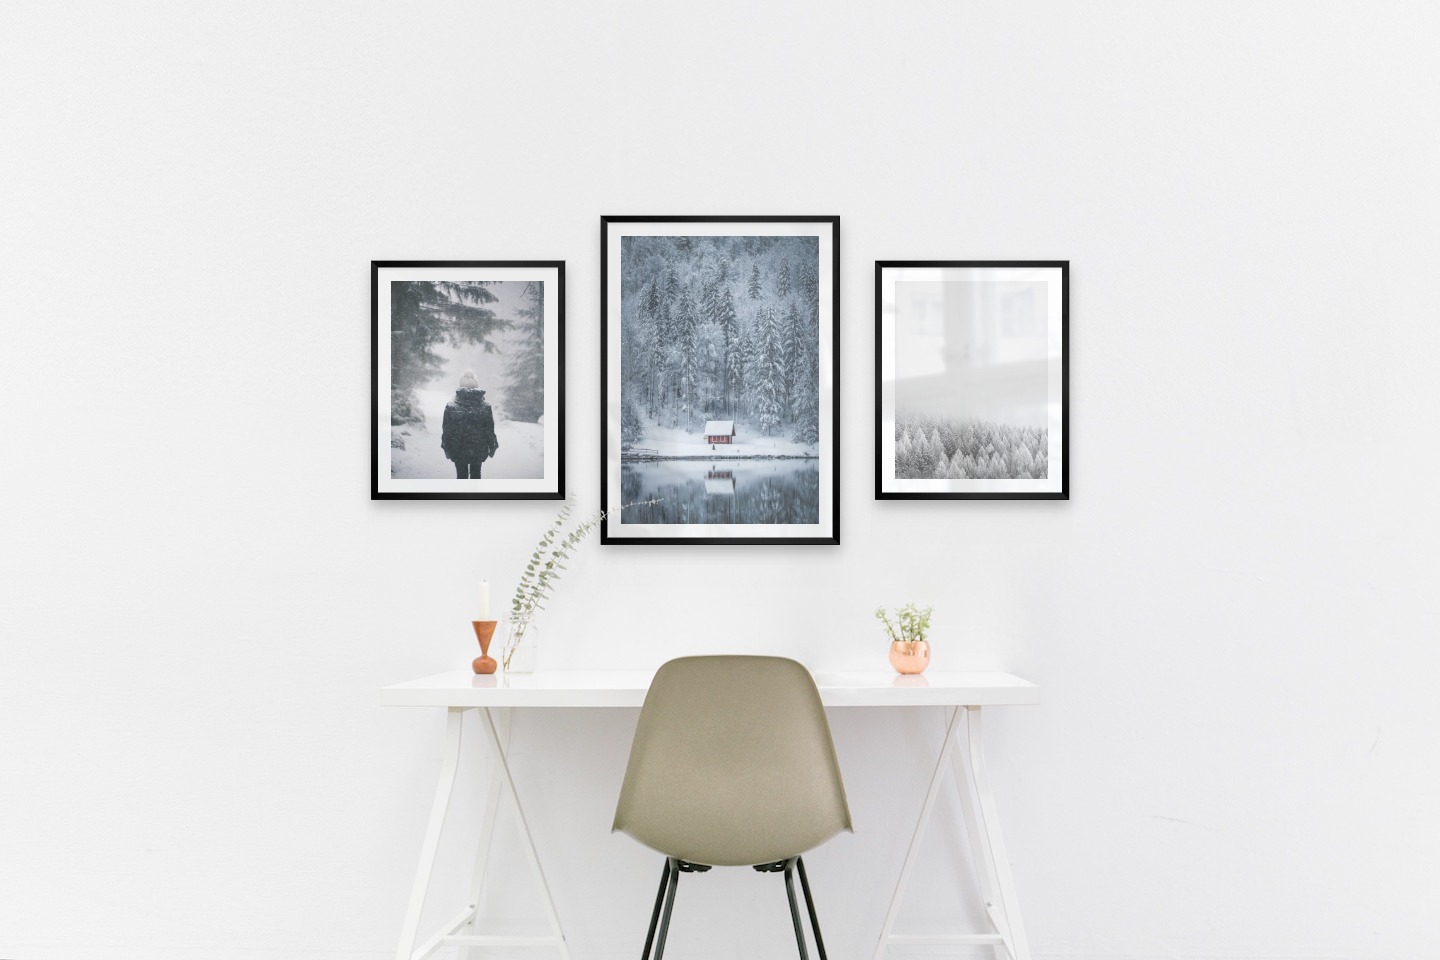 Gallery wall with picture frames in black in sizes 40x50 and 50x70 with prints "Person in the snow", "Cottage by the lake" and "Wooden tops in winter"